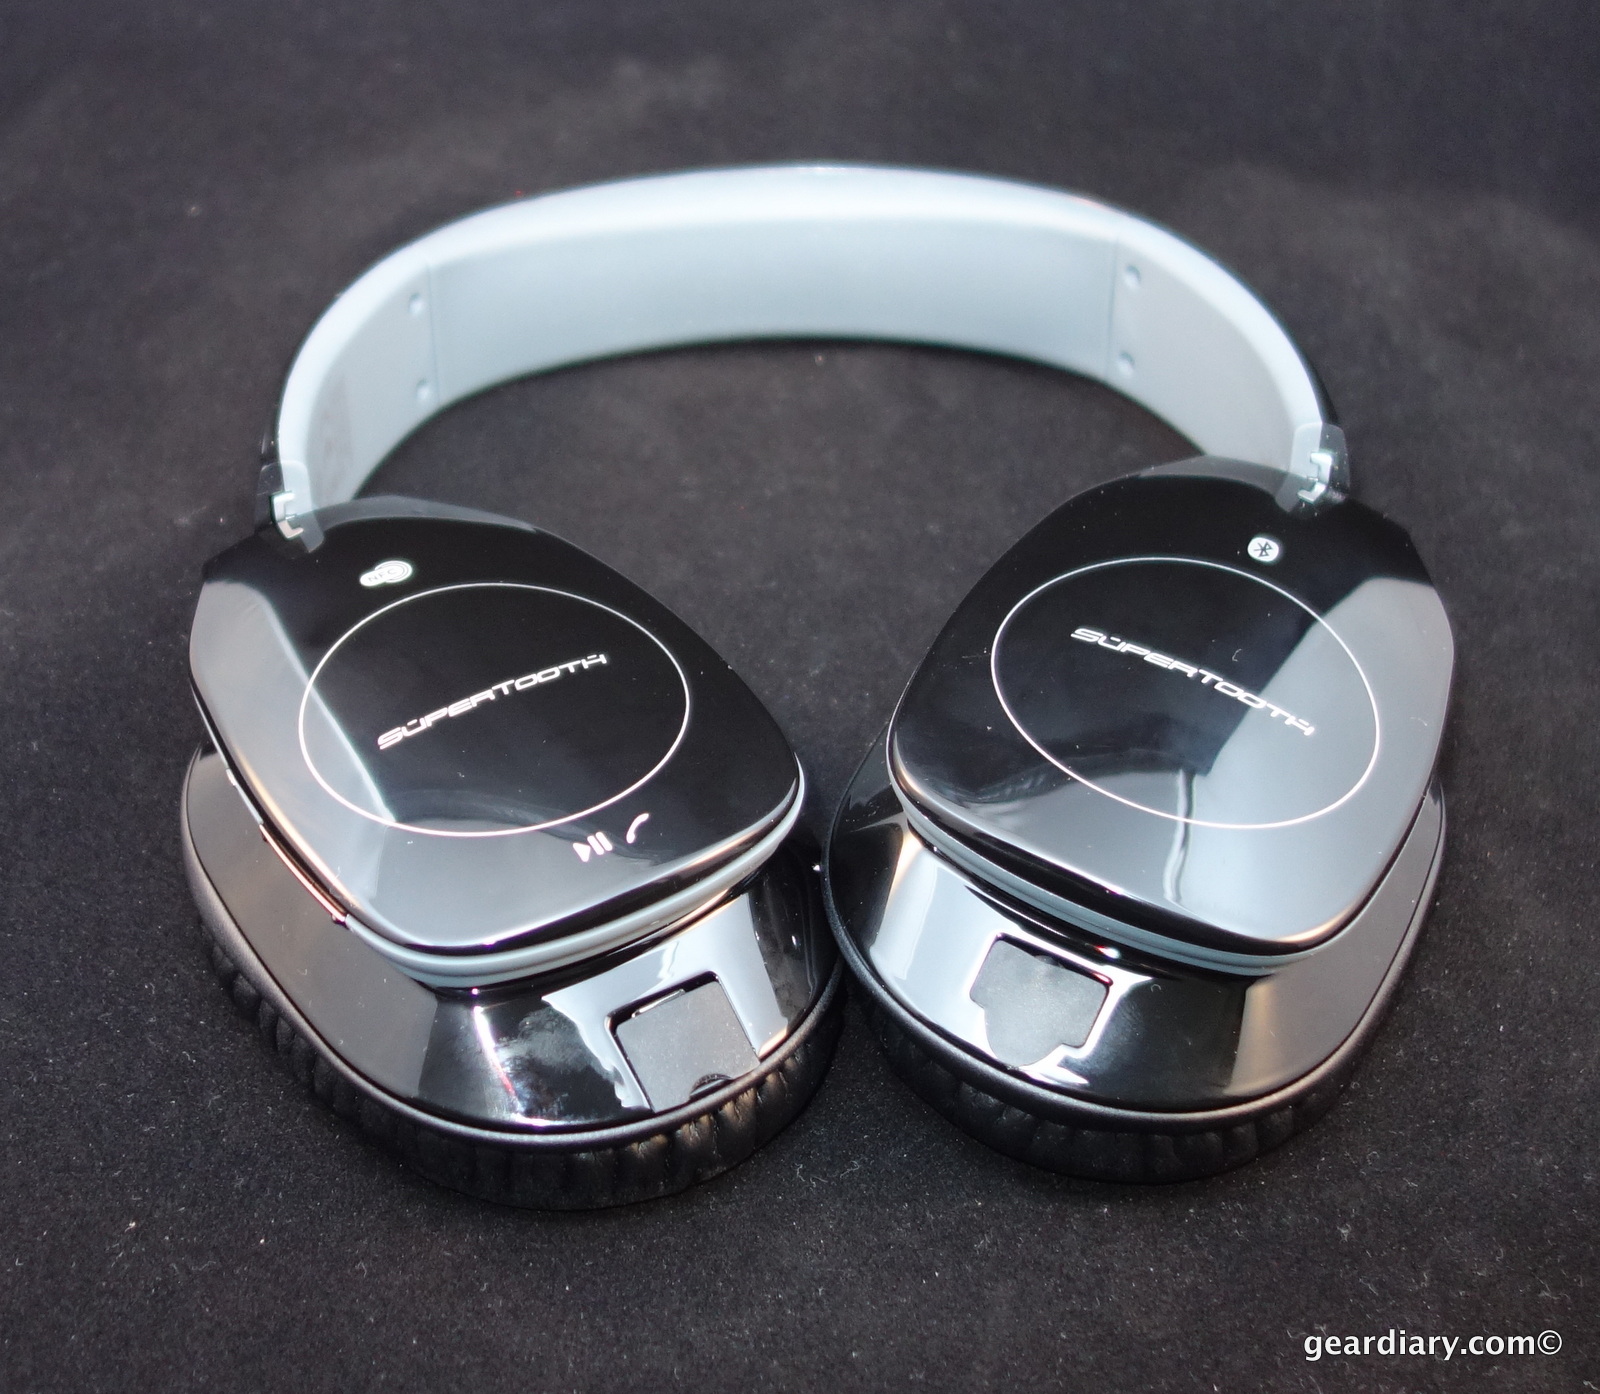 SuperTooth Freedom Bluetooth Stereo Headset Review - Great Sound at an Even Better Price